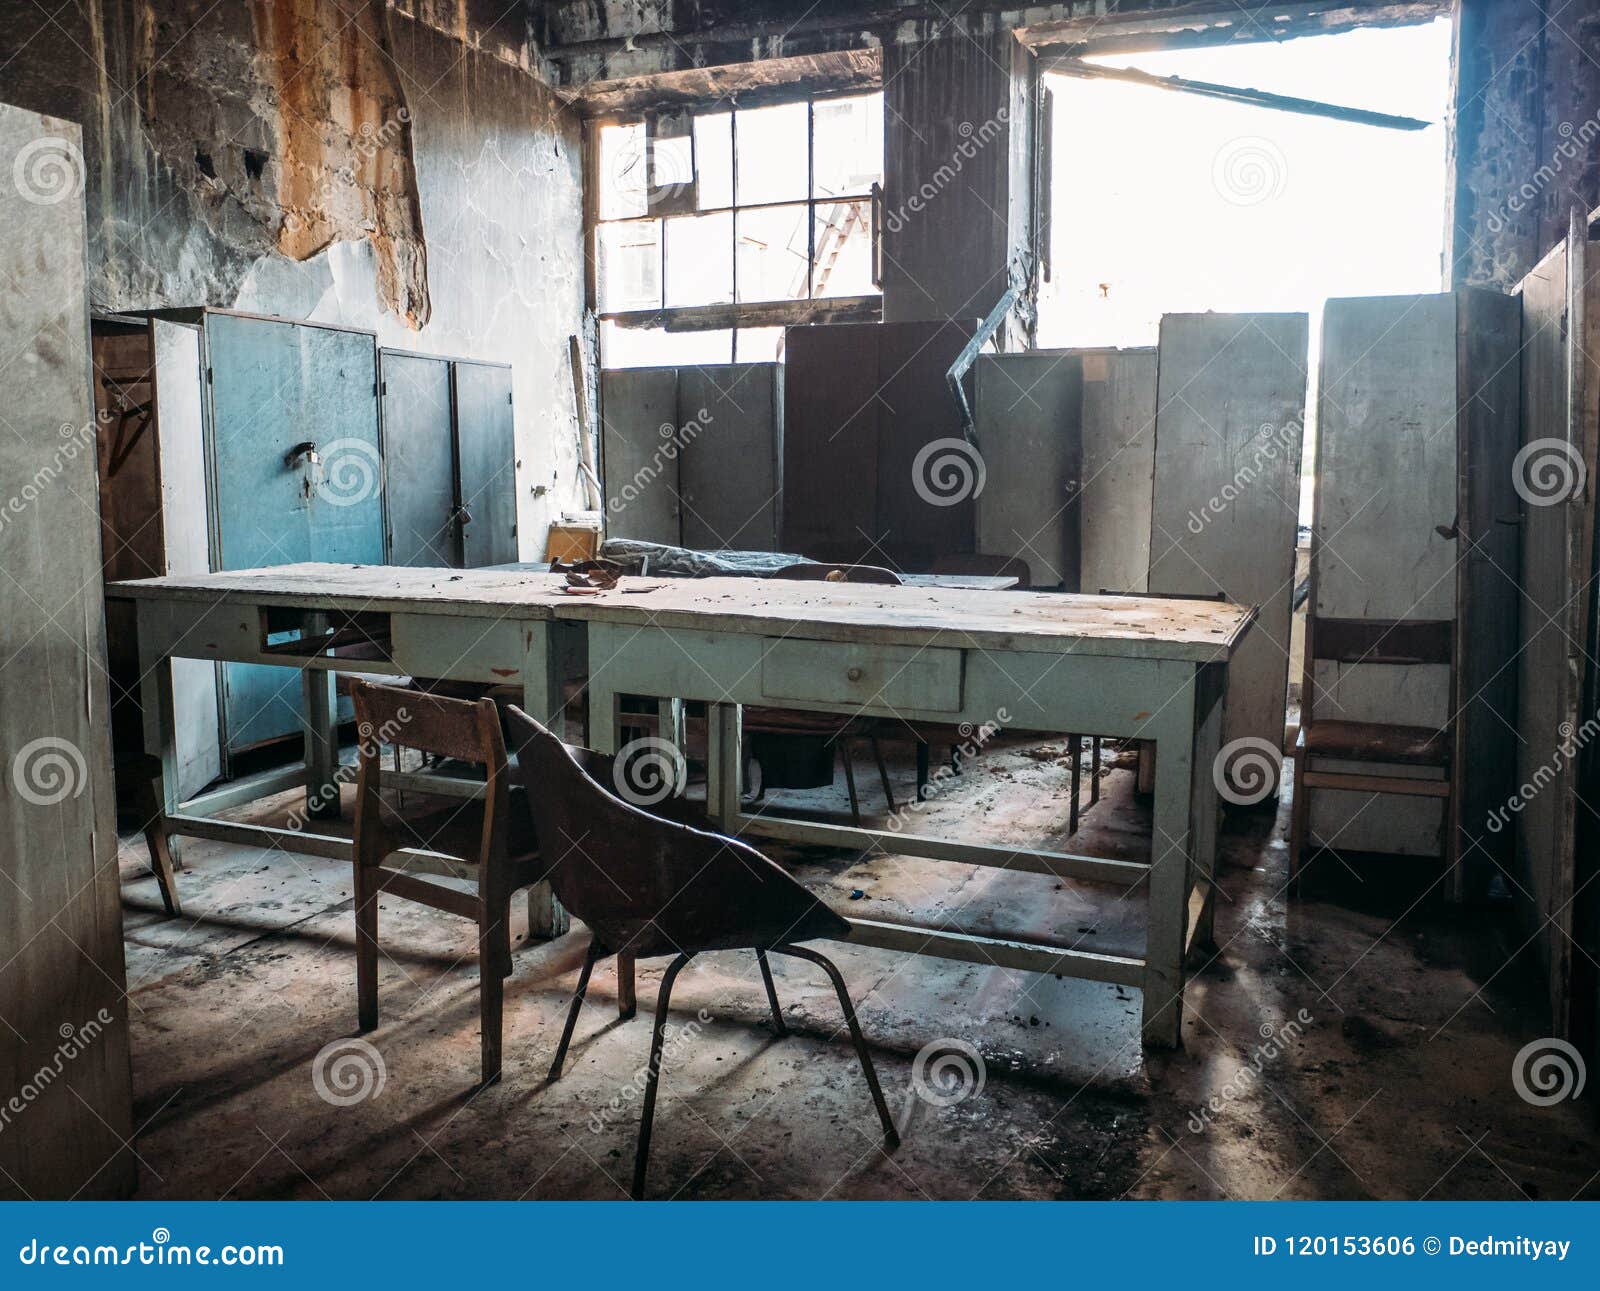 abandoned ruined house with furniture after war or disaster, old building inside interior